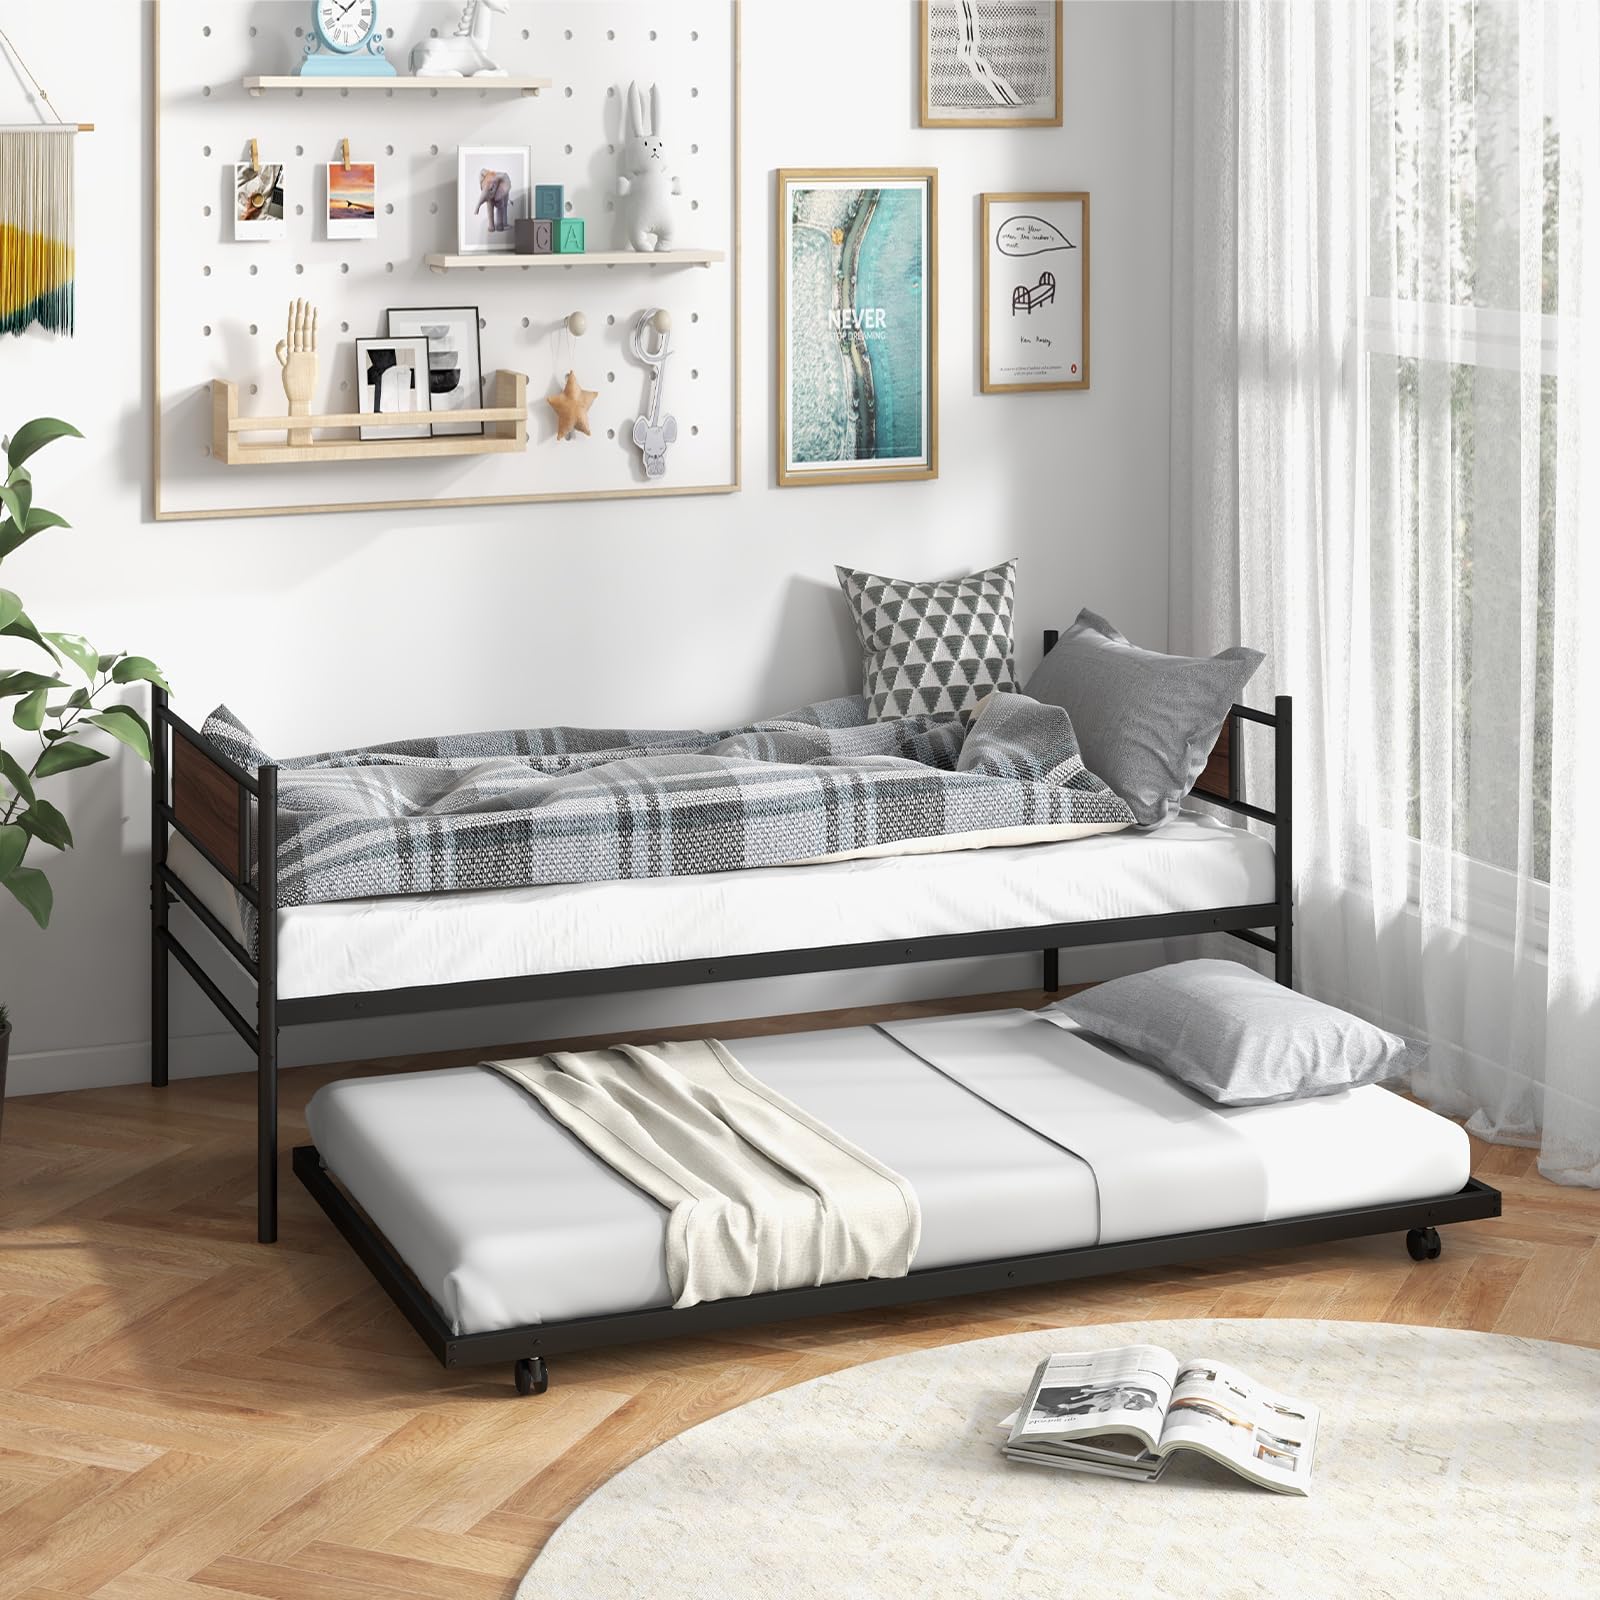 Giantex Metal Daybed with Trundle, Twin Size Day Bed with Wood Grain Headboard & Metal Slat Support